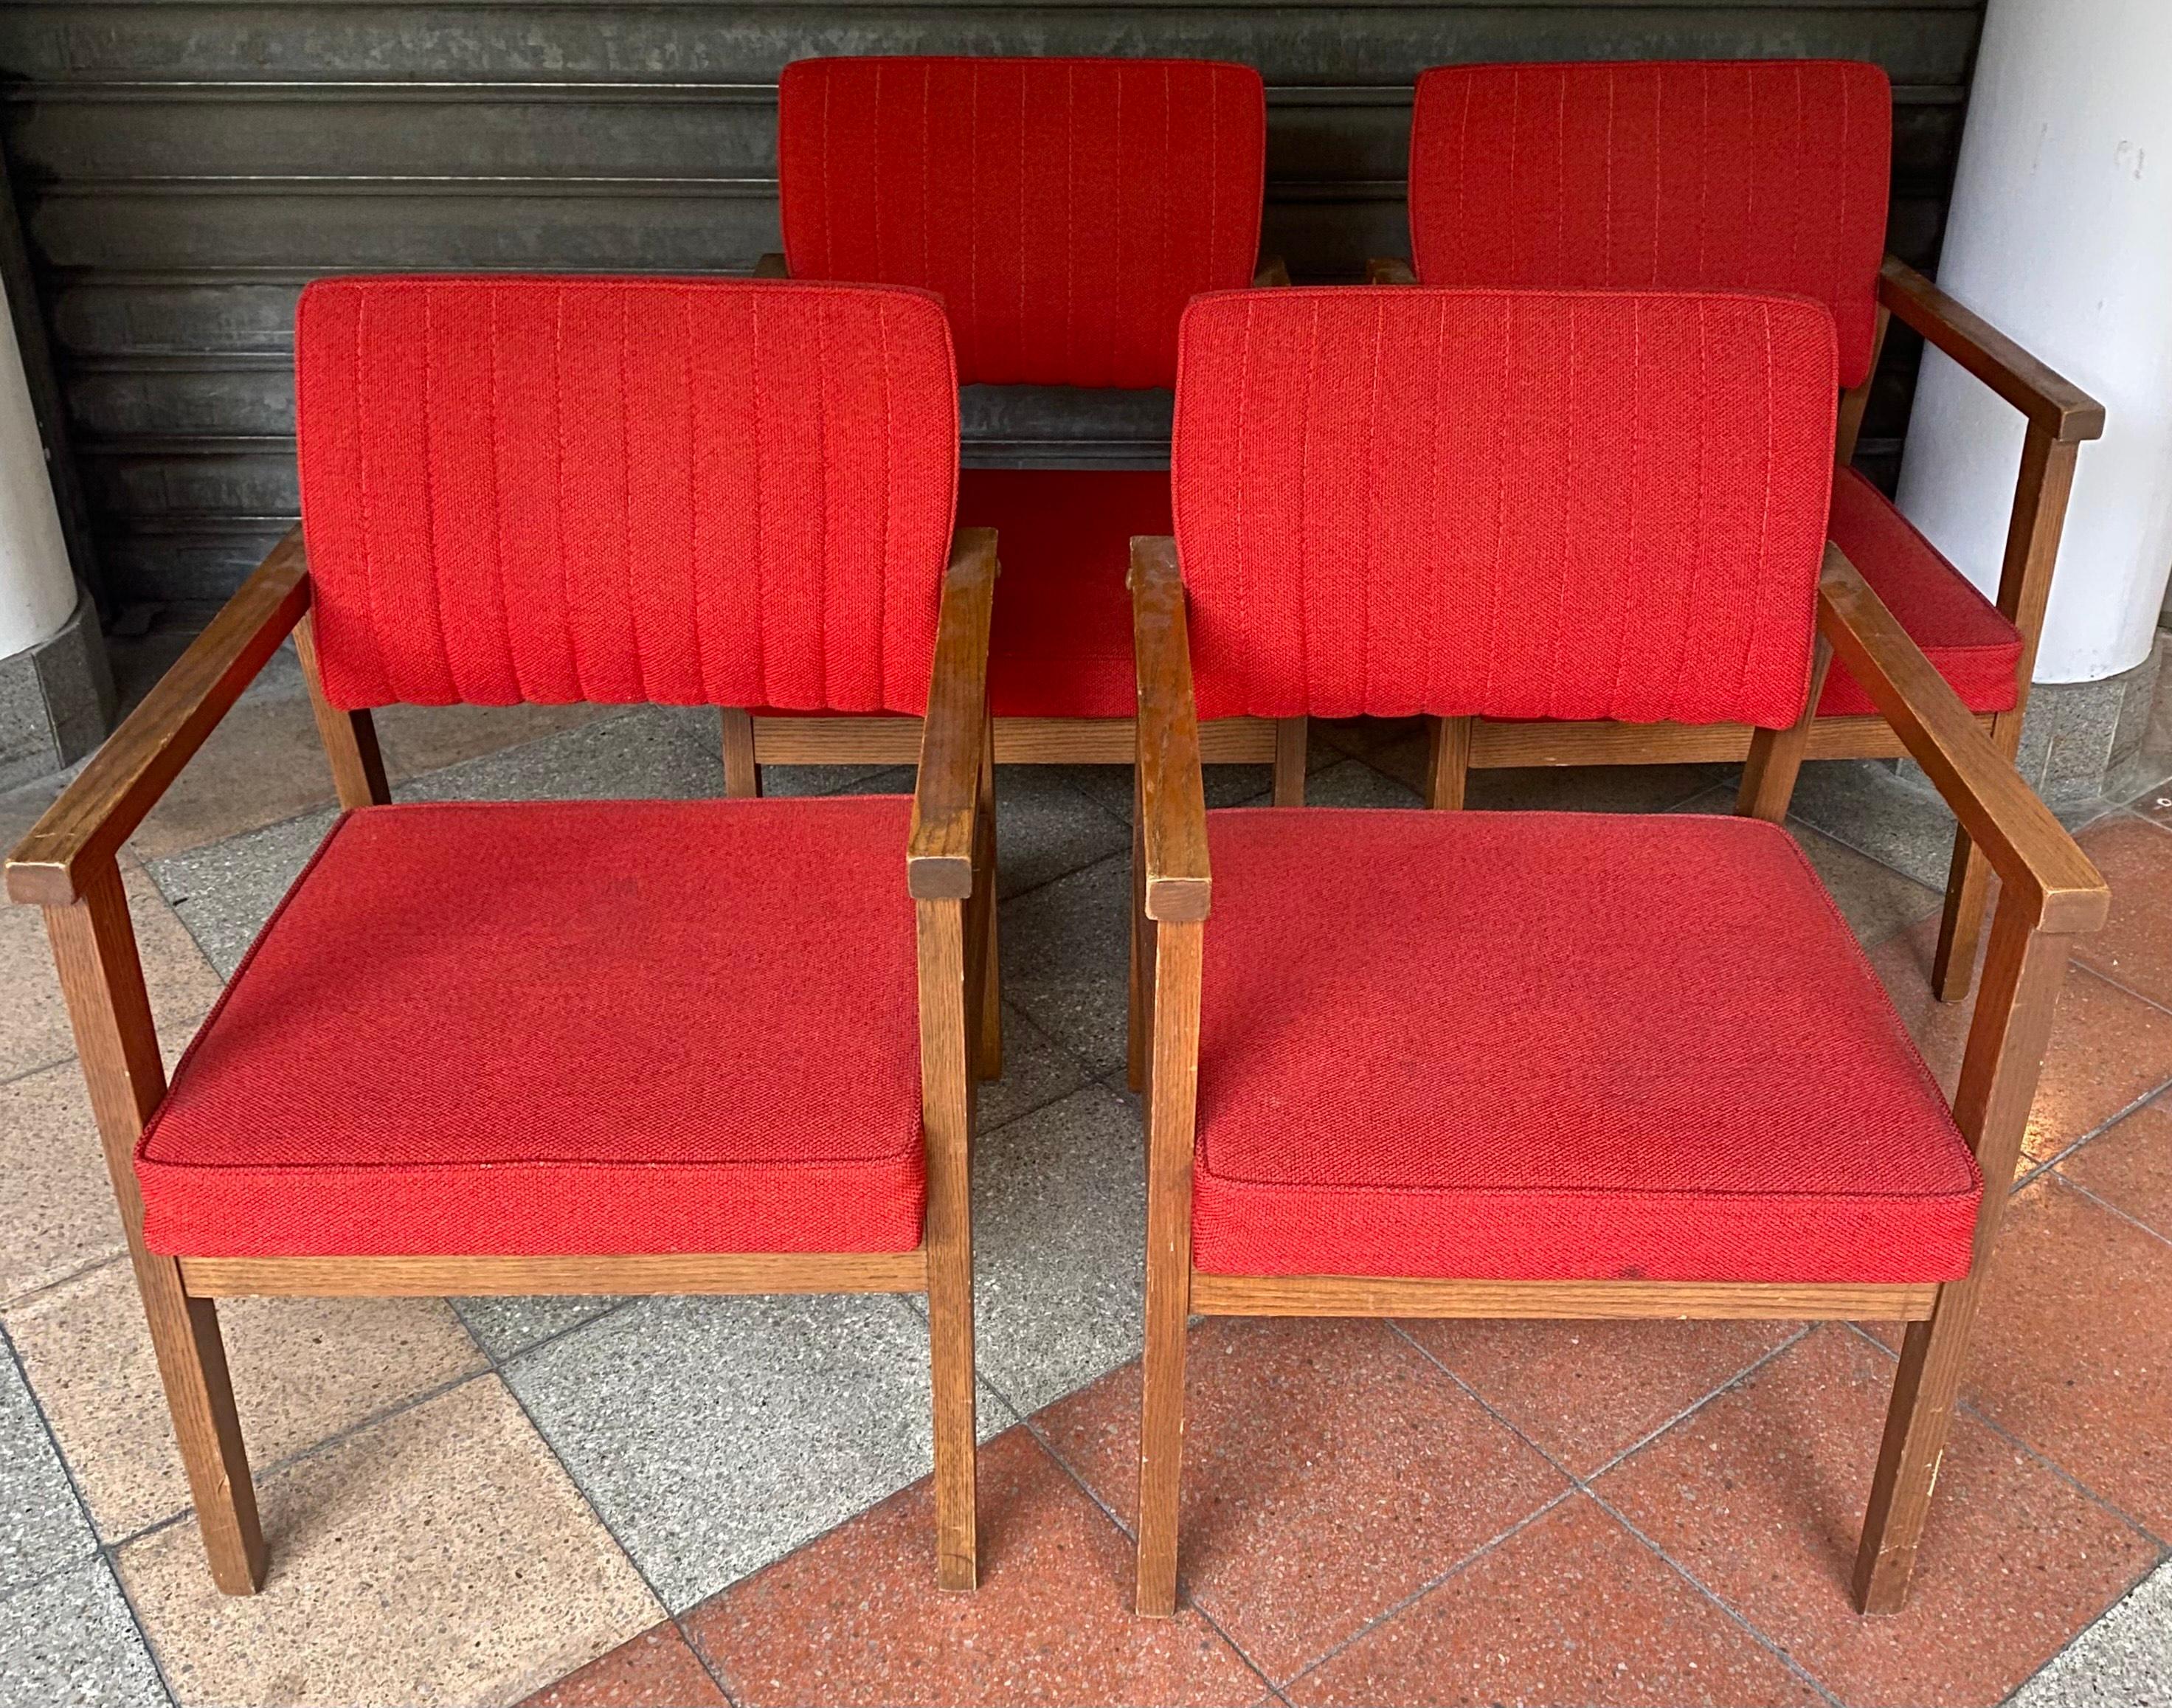 Suite of 4 red armchairs 
Rosewood / Red Jersey 
Canadian Atlas Furniture 
Dimensions :h80x55x60cm
Circa 1971
ref 1547/39
Excellent condition 
Price : 800€ for 4.